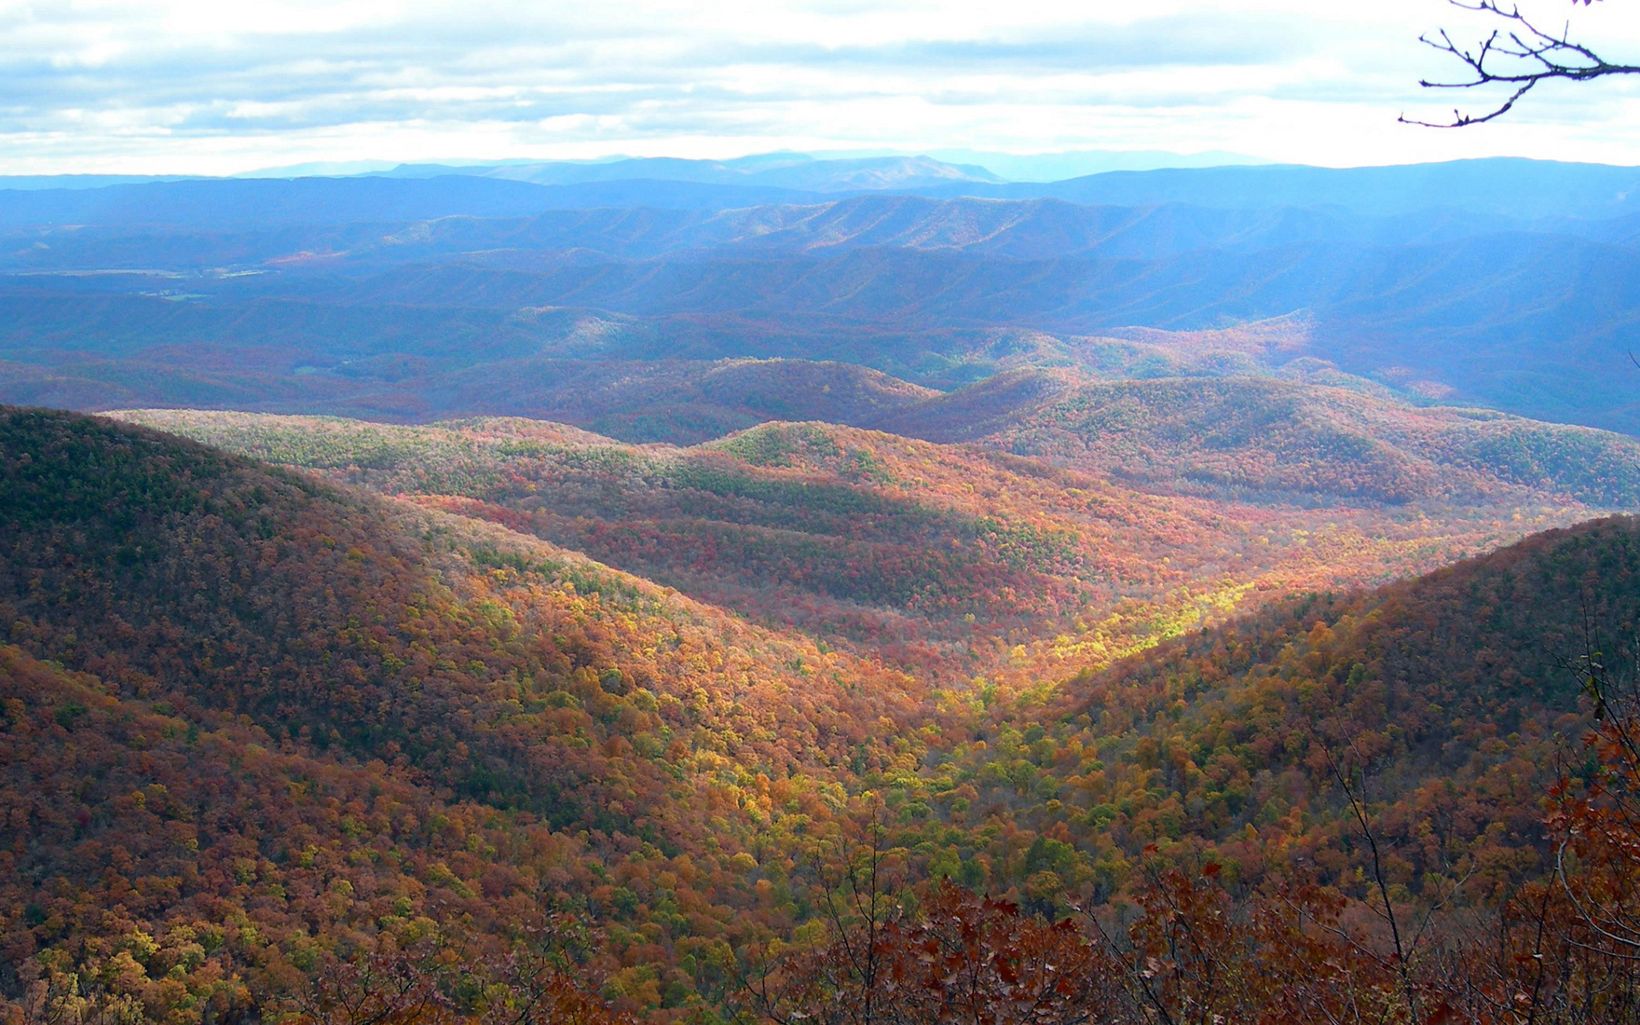 Overlook view of a wide forested valley. The afternoon sun creates shadows across the mix of green and gold leaves. Blue tinged mountains rise in the distance.